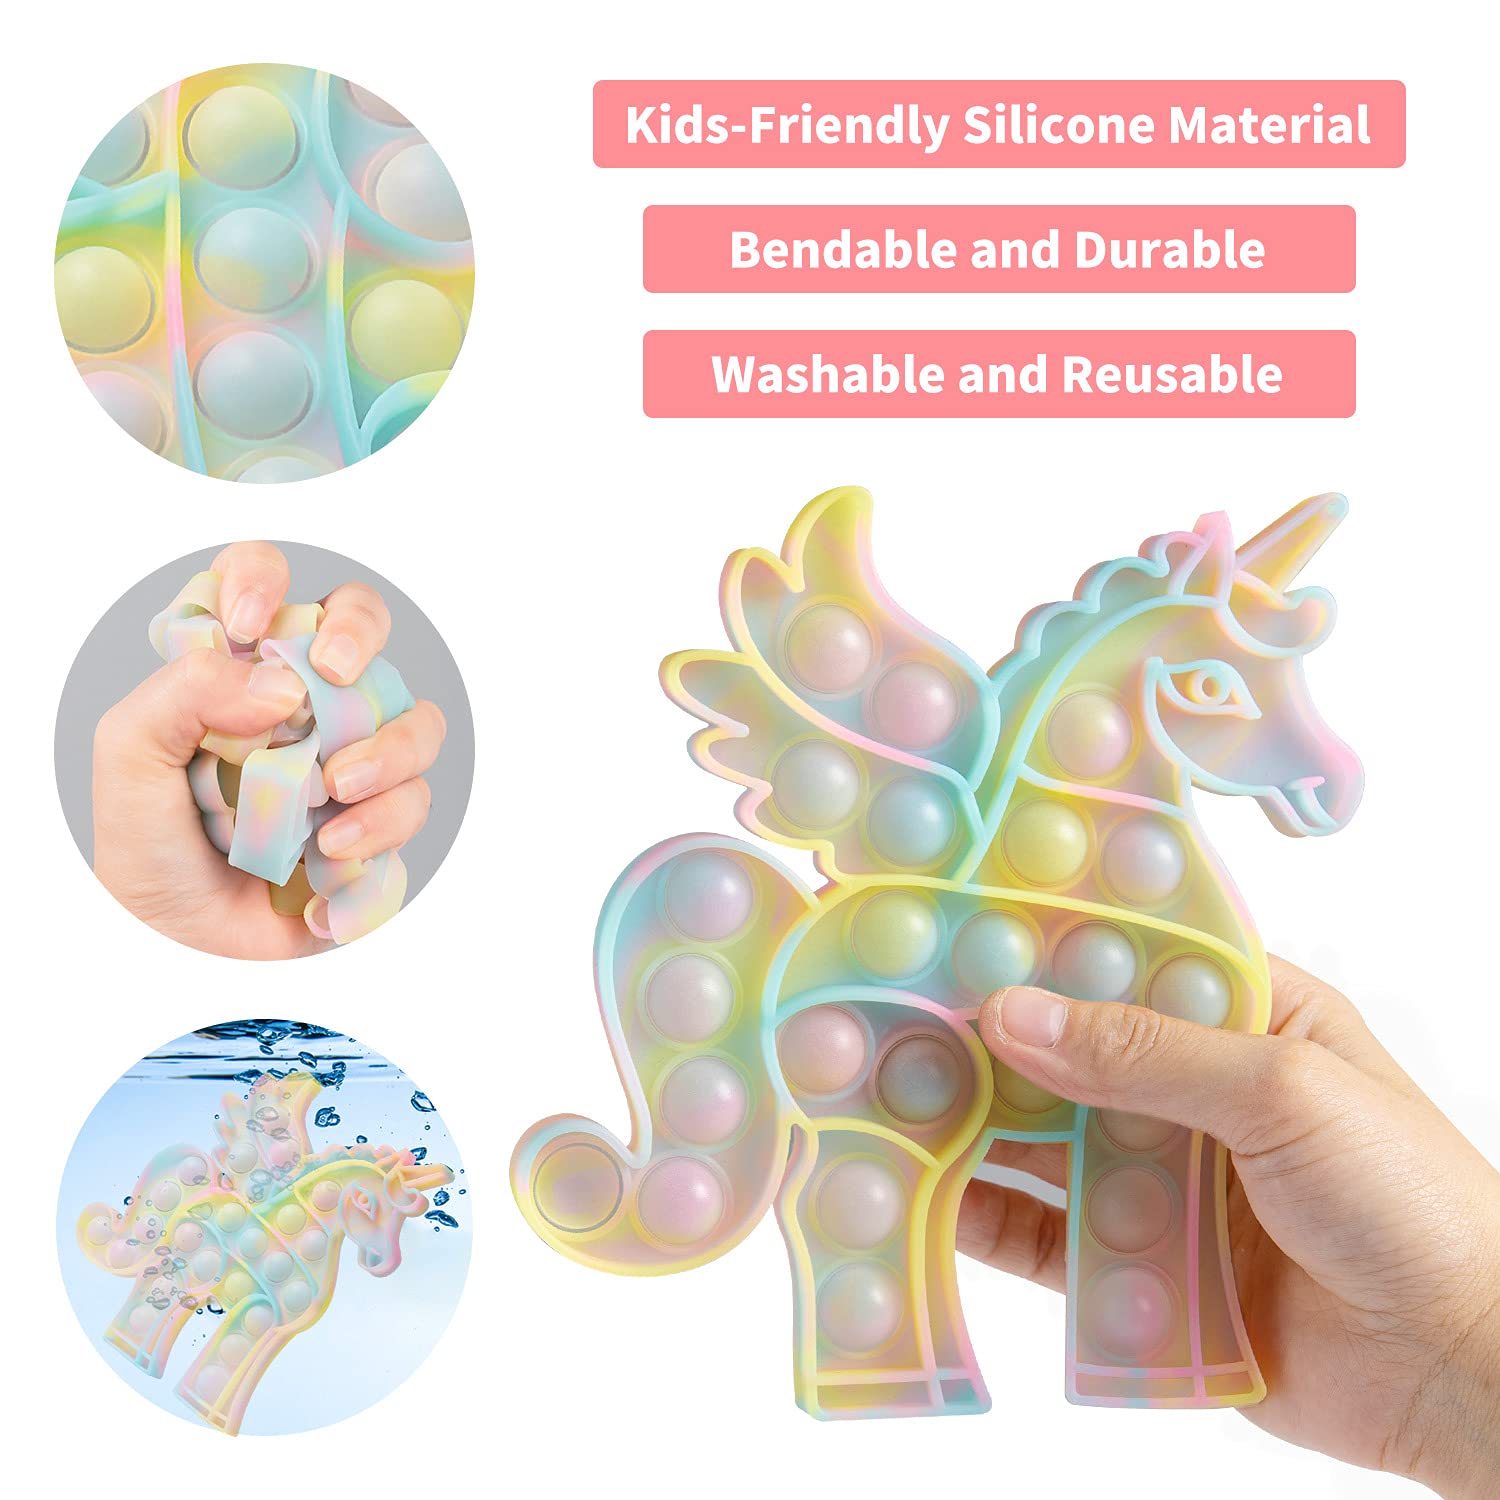 WHATOOK POP Fidget Llama Toys its: 2pack Poppers Sensory Special Needs Stress Relief and Anti-Anxiety Silicone Squeeze Bubble Alpaca Toy Tools for Kids and Adults